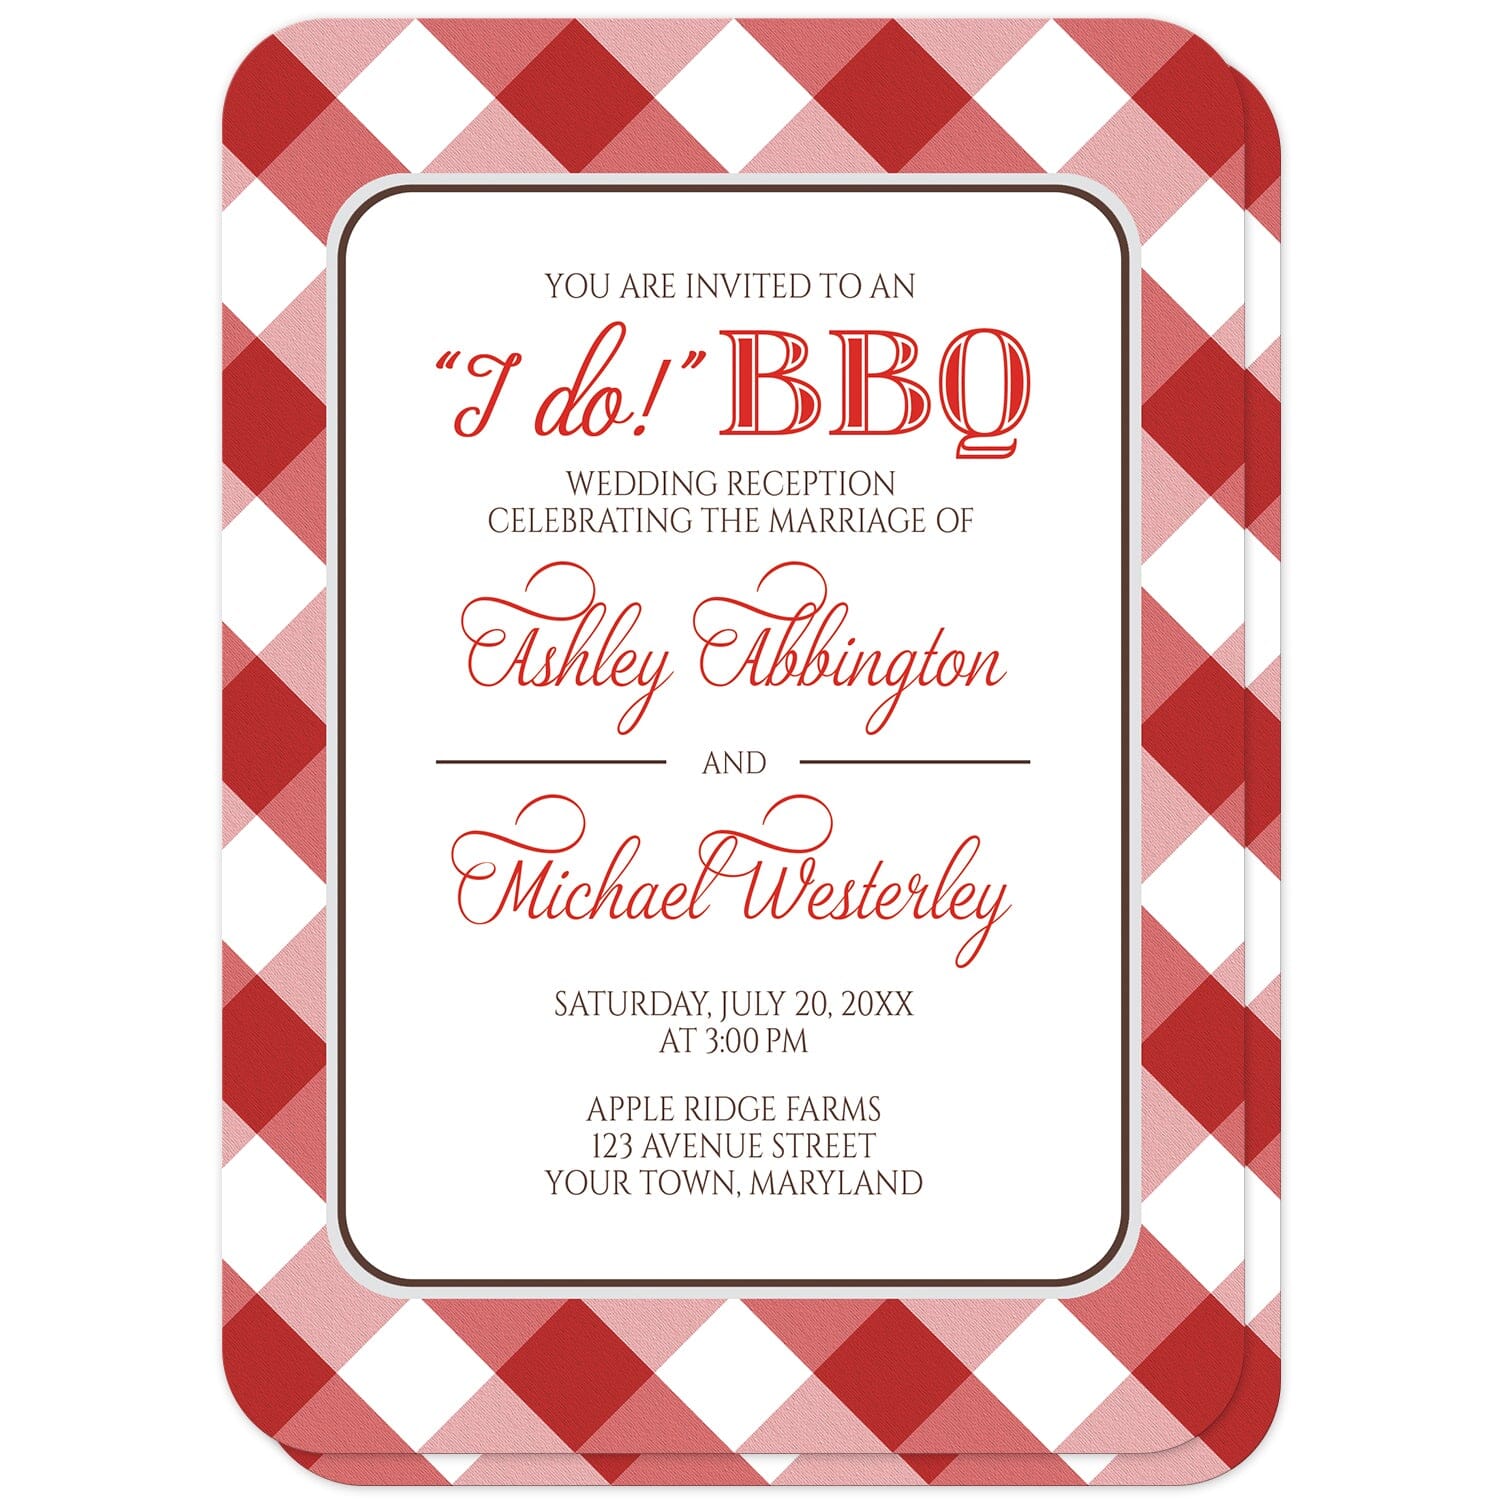 Red Gingham I Do BBQ Reception Only Invitations (with rounded corners) at Artistically Invited. Red gingham I Do BBQ reception only invitations with your personalized post-wedding reception details custom printed in red and brown inside a white rectangular area outlined in brown and light gray. The background design is a diagonal red and white gingham pattern which is also printed on the back side. 